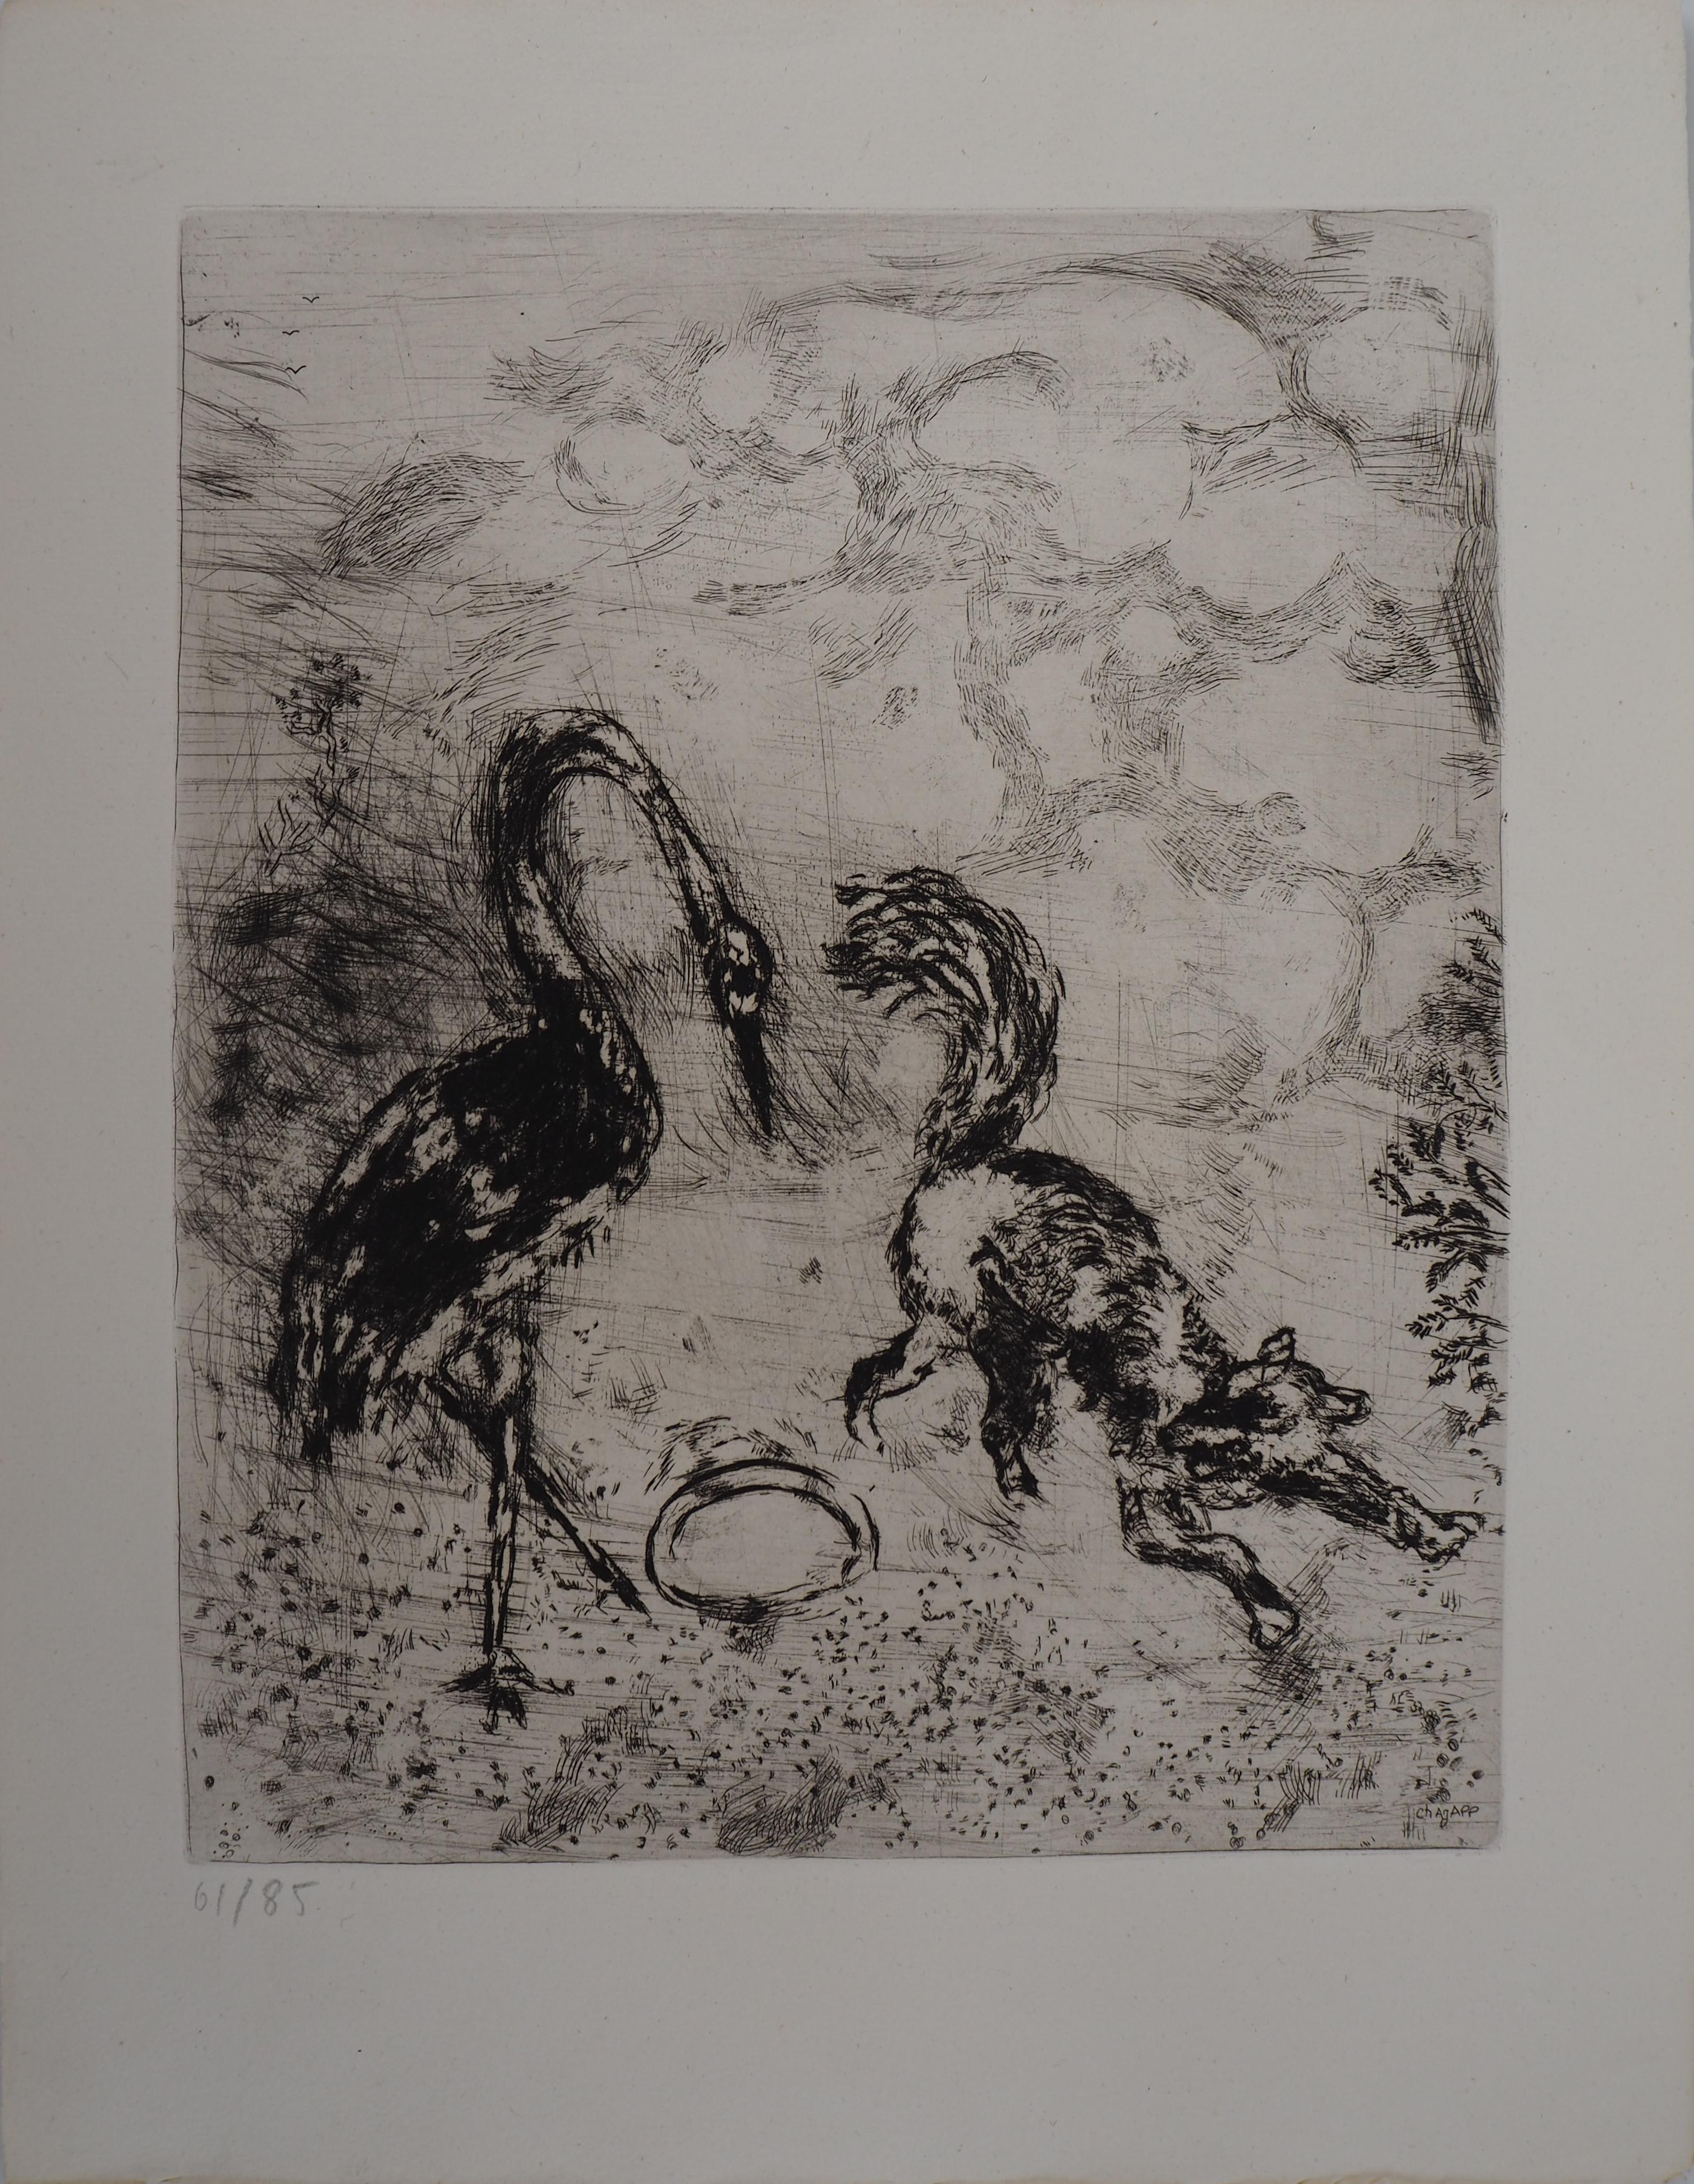 Marc Chagall Animal Print - The Fox and The Stork - Original Etching - Ref. Sorlier #102